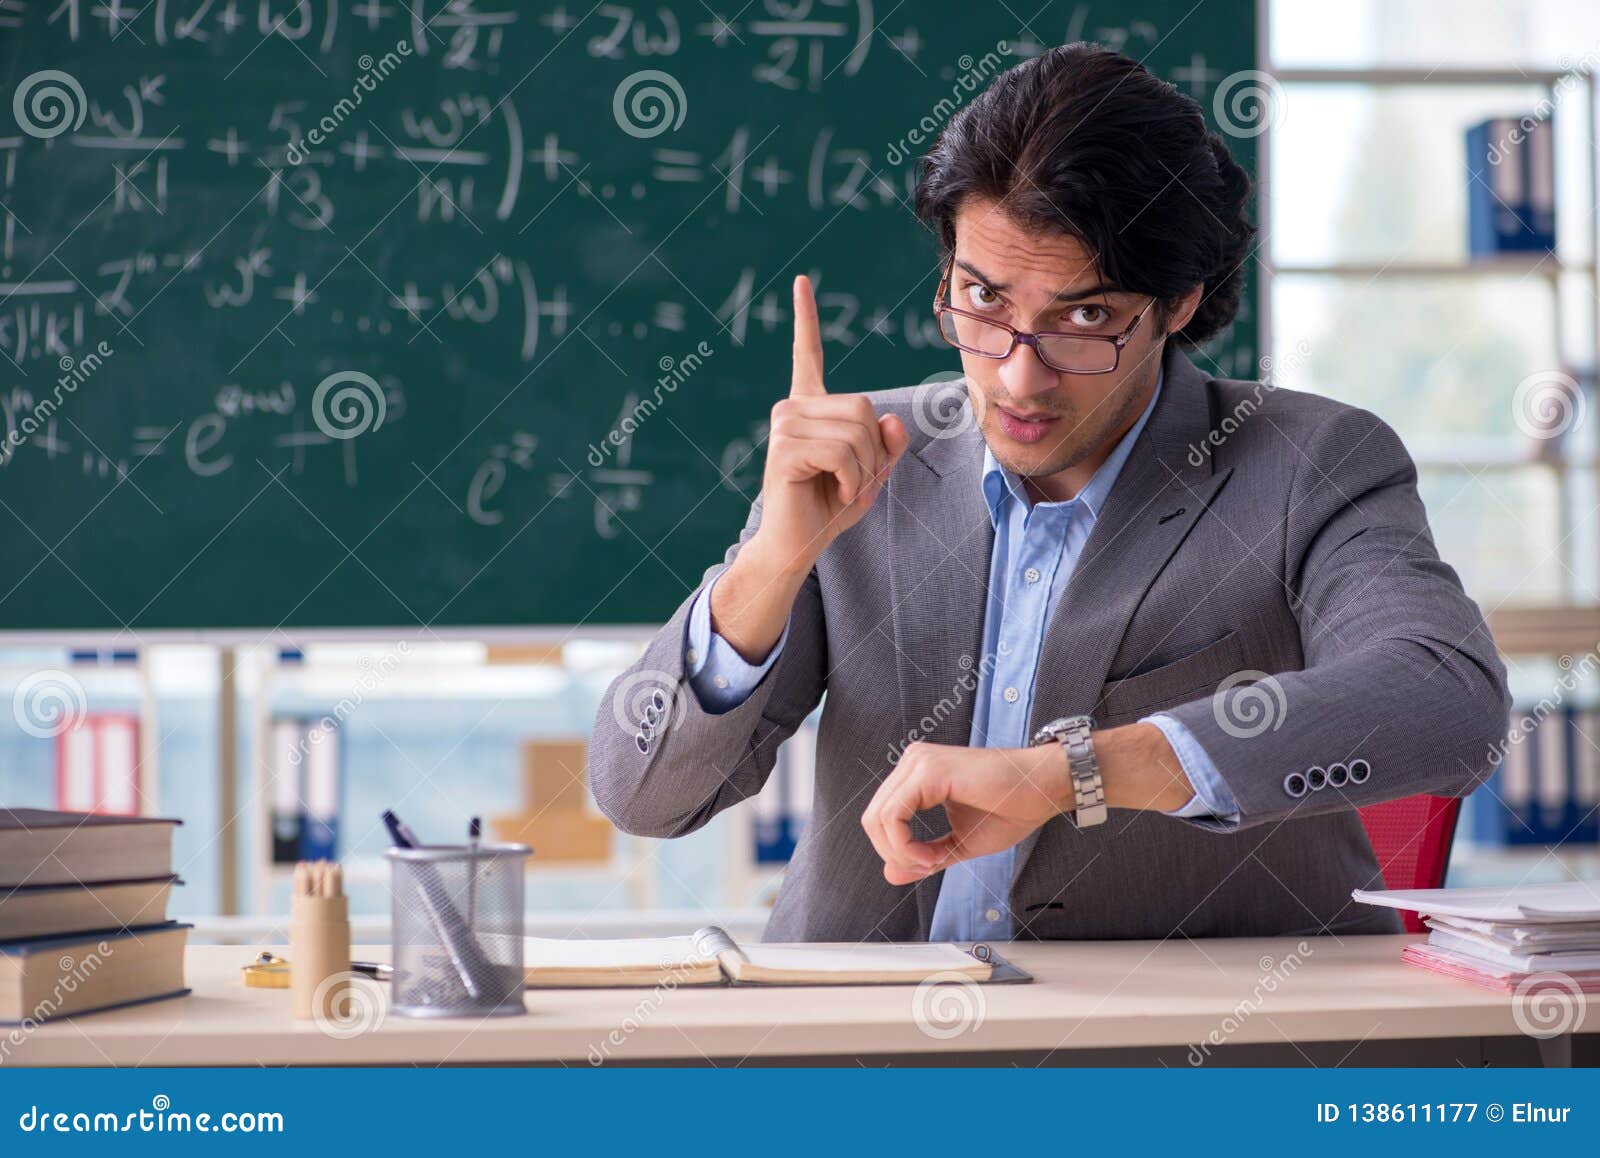 The Young Handsome Math Teacher In Classroom Stock Image Image